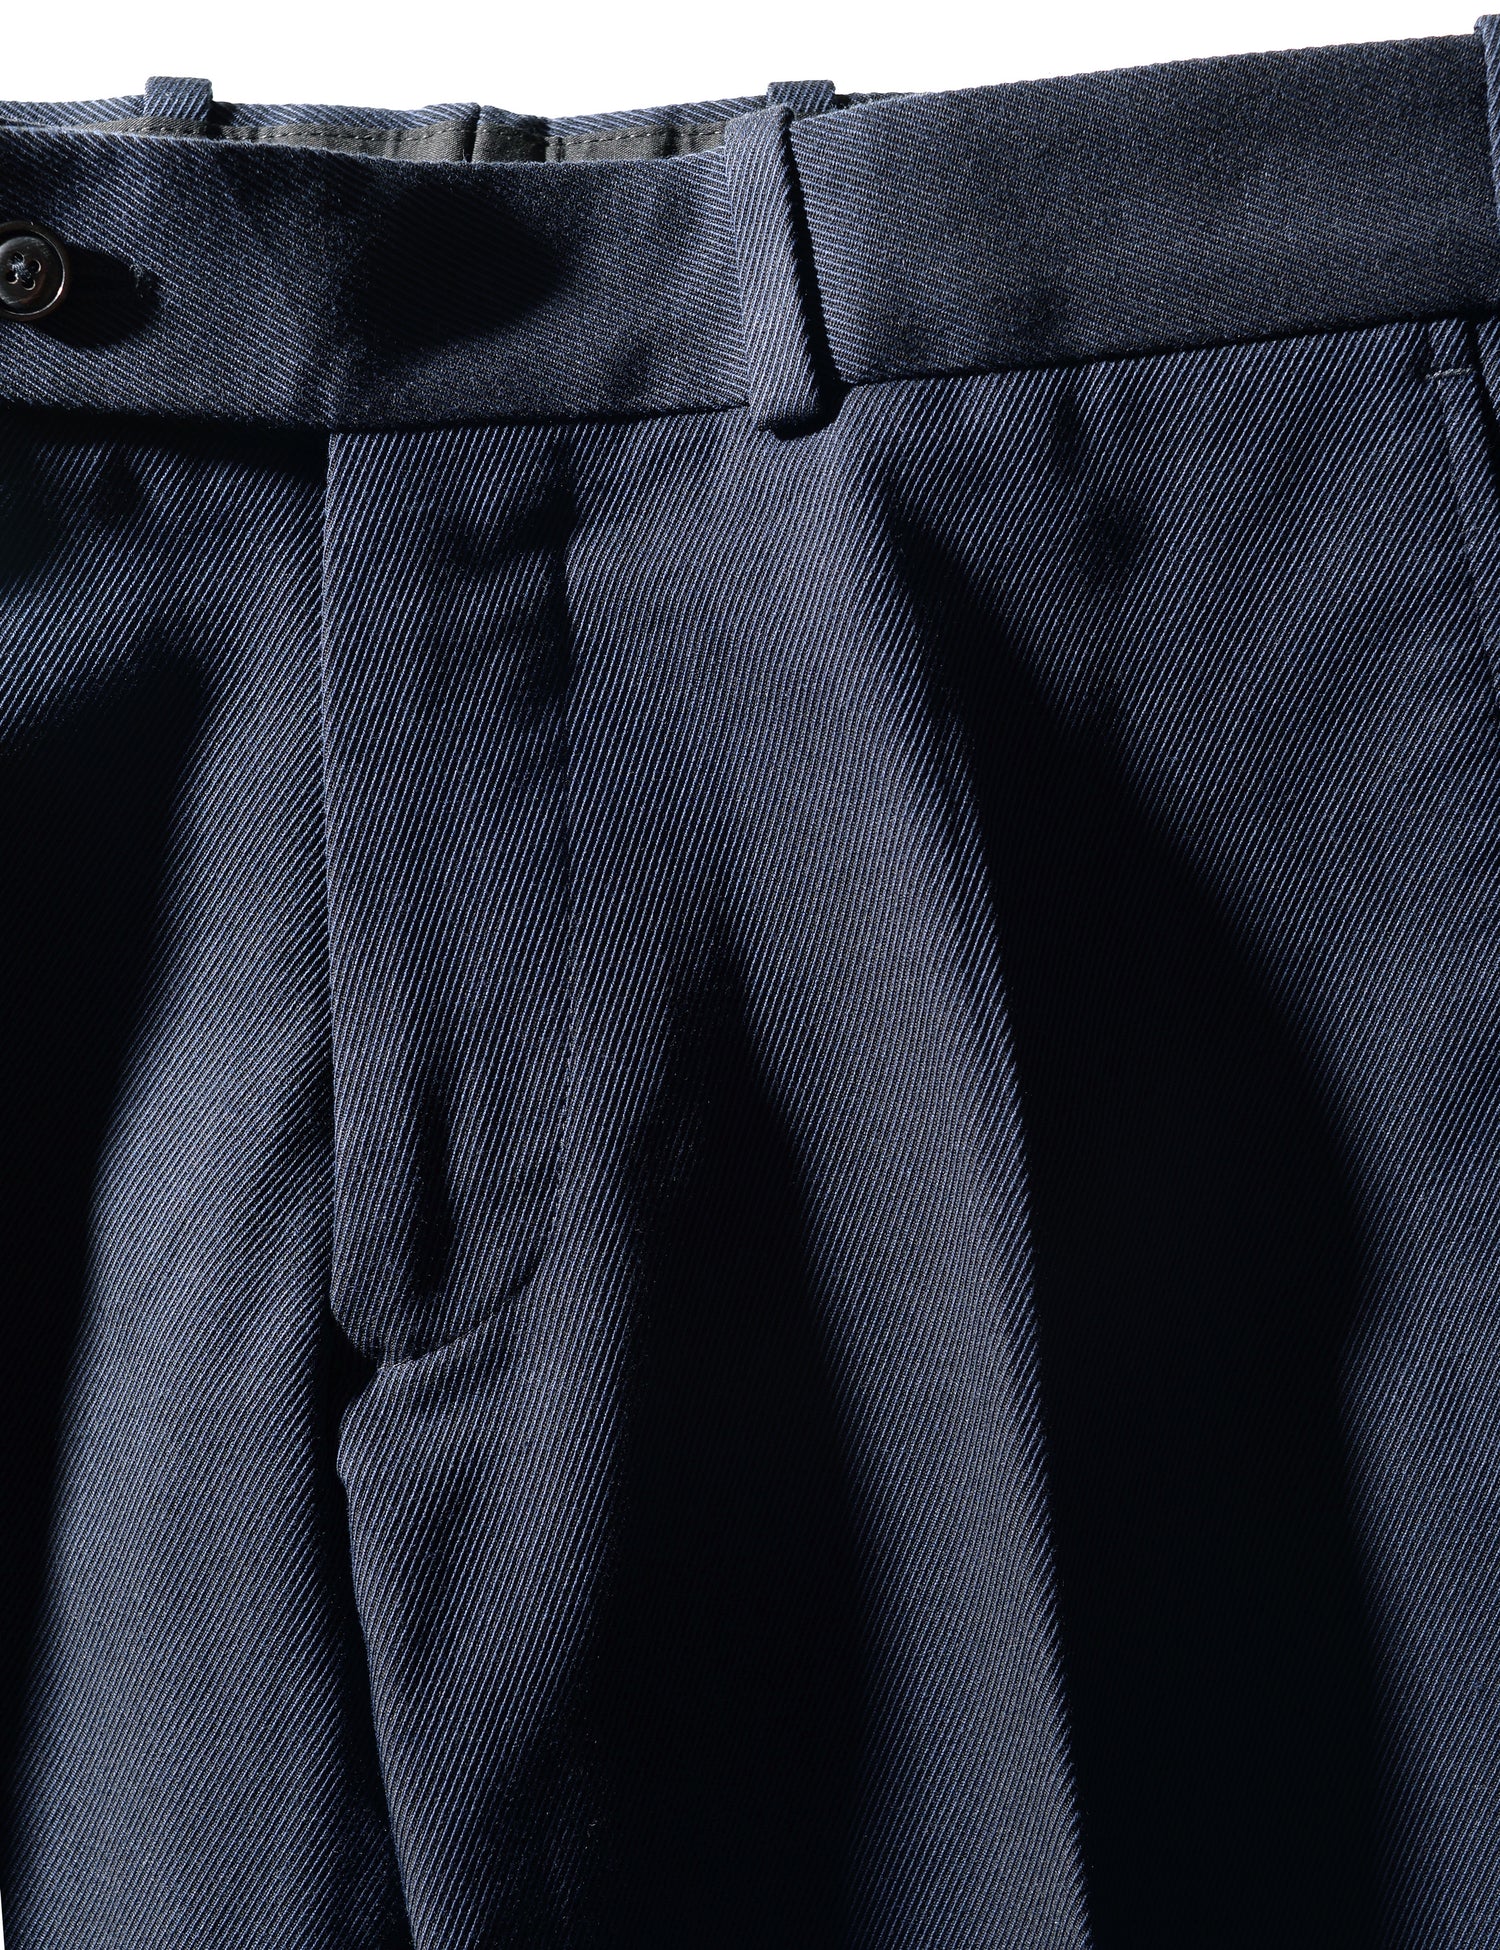 Detail shot of Brooklyn Tailors BKT50 Tailored Trousers in Cavalry Twill - Navy showing front, waistband and fabric texture